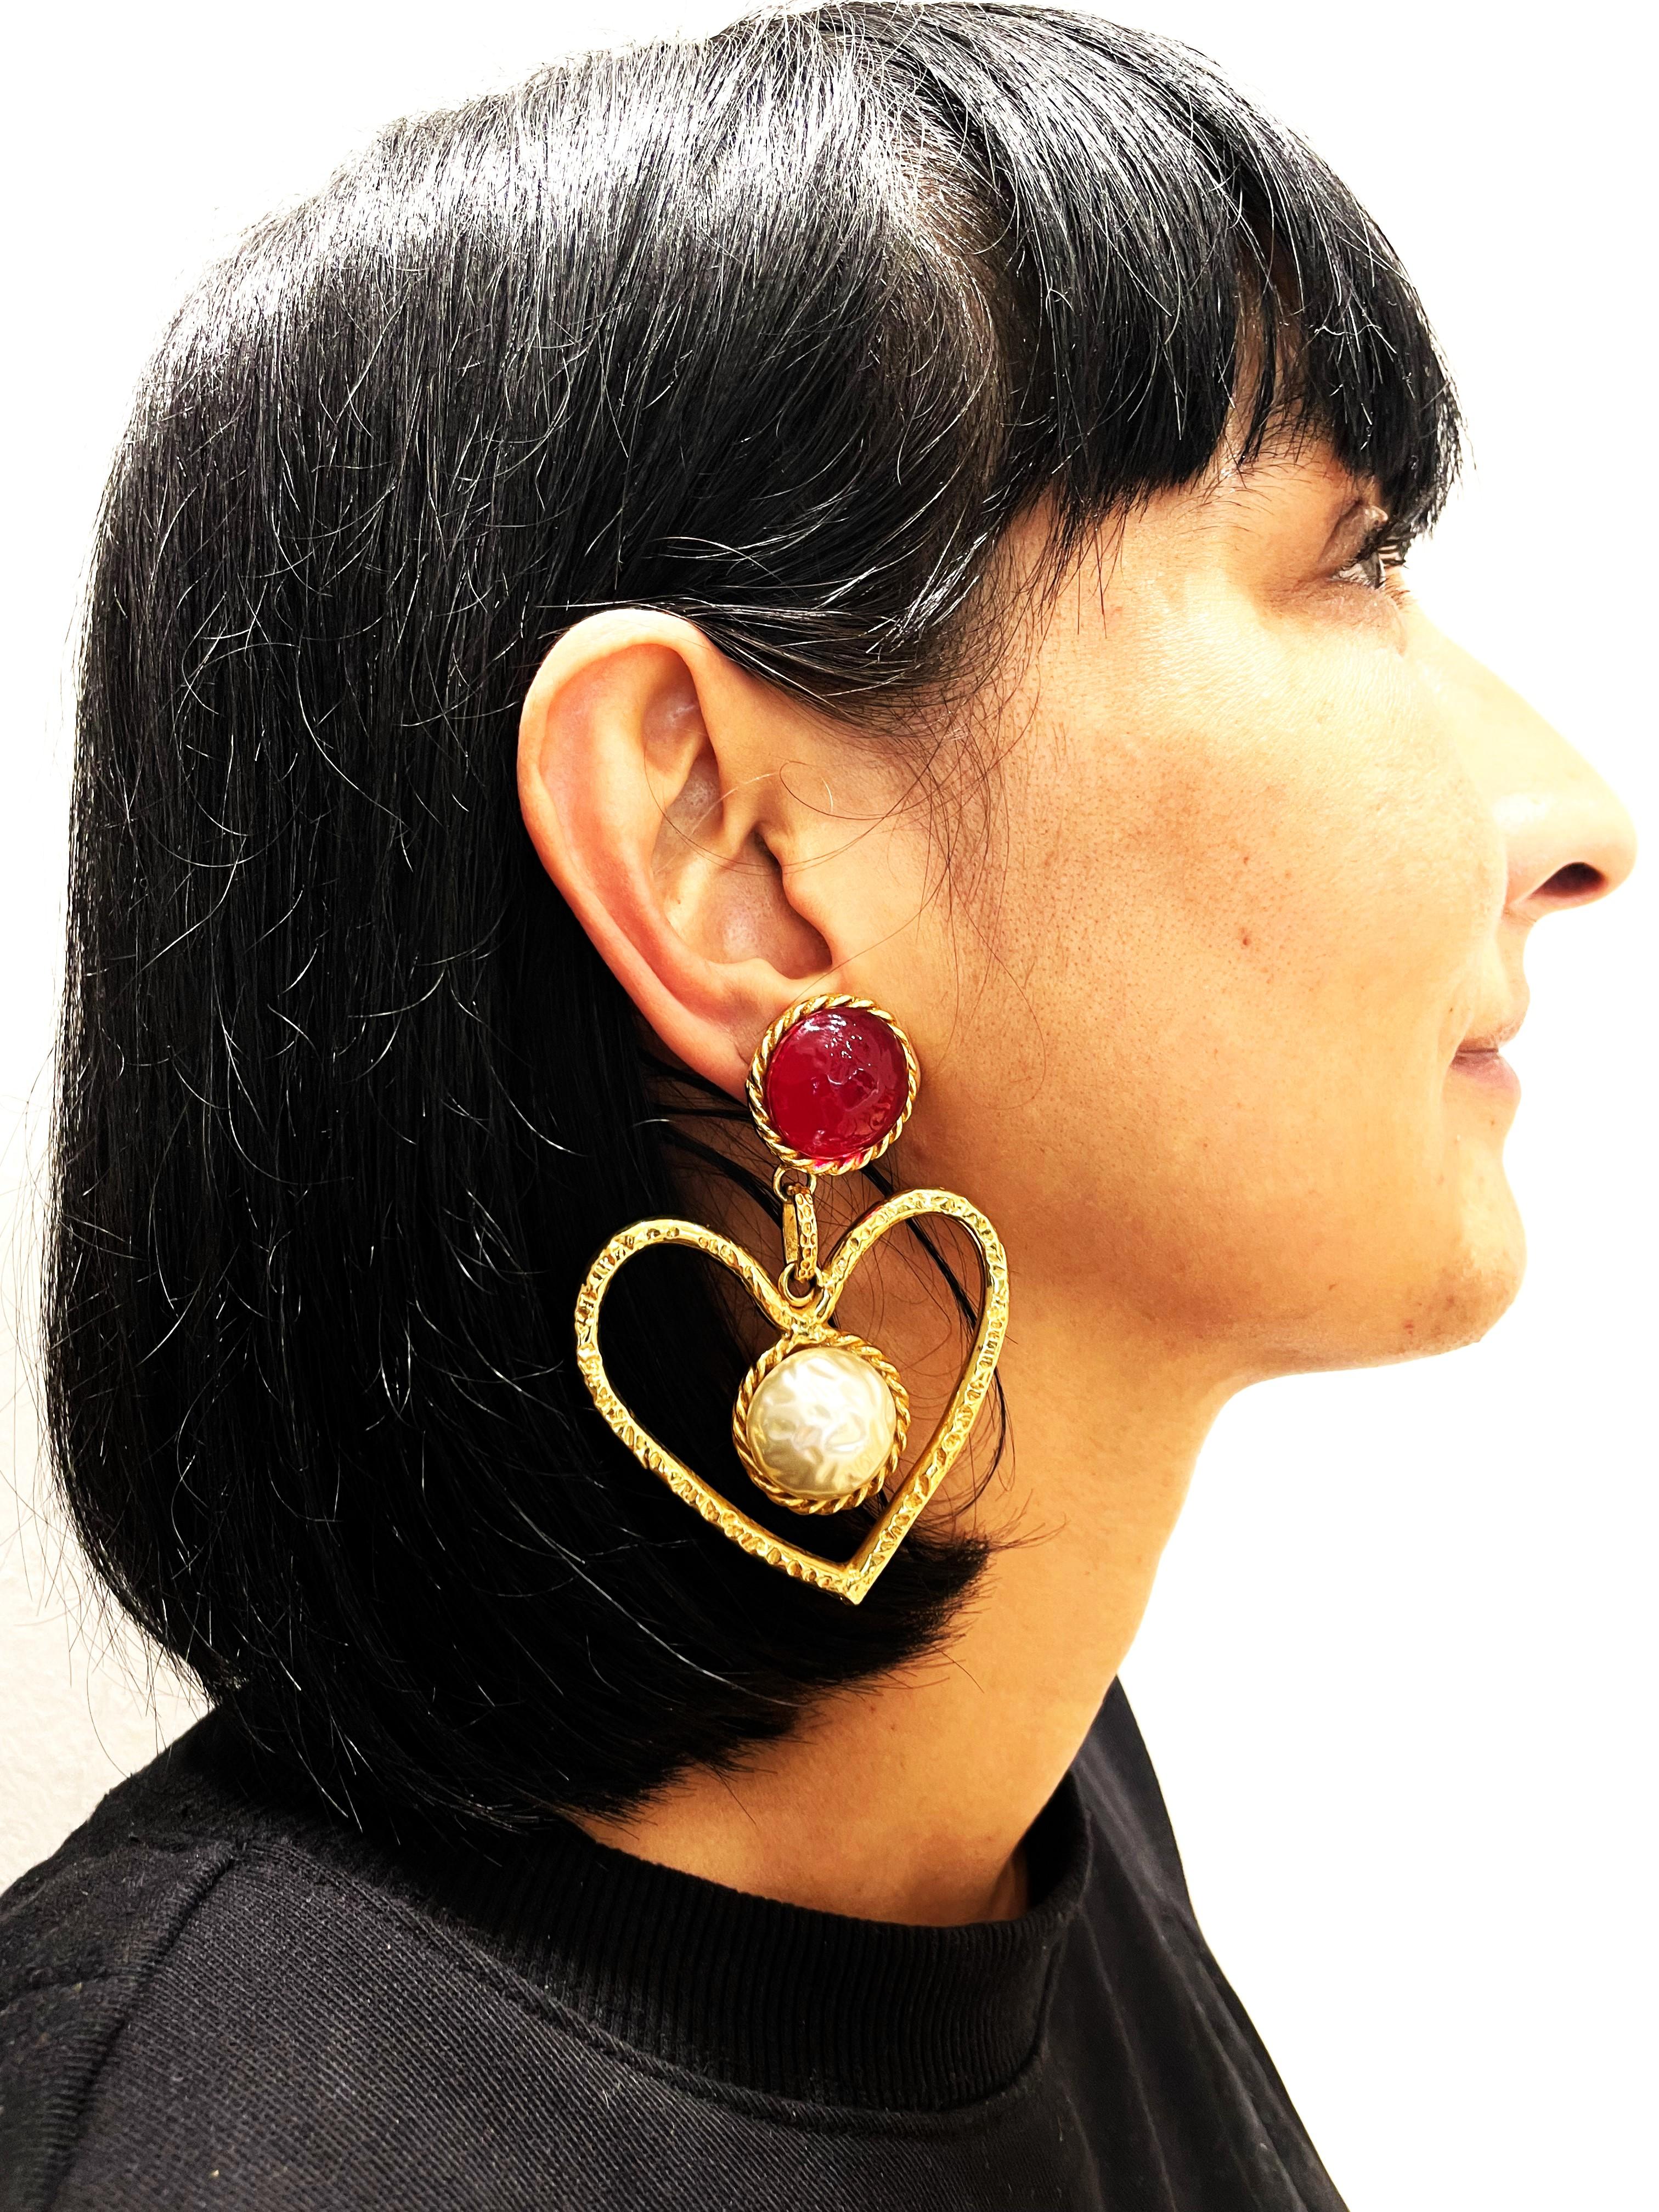 Heart-shaped ear clip with red Gripoix glass and large handmade pearl from GIVENCHY PARIS 1980s
Measurement;
Whole length 8 cm - Heart width 6 cm
Above red Gripoix stone 2.4 cm in diameter - handmade pearl 2.4 cm in diameter
Features:
- Original